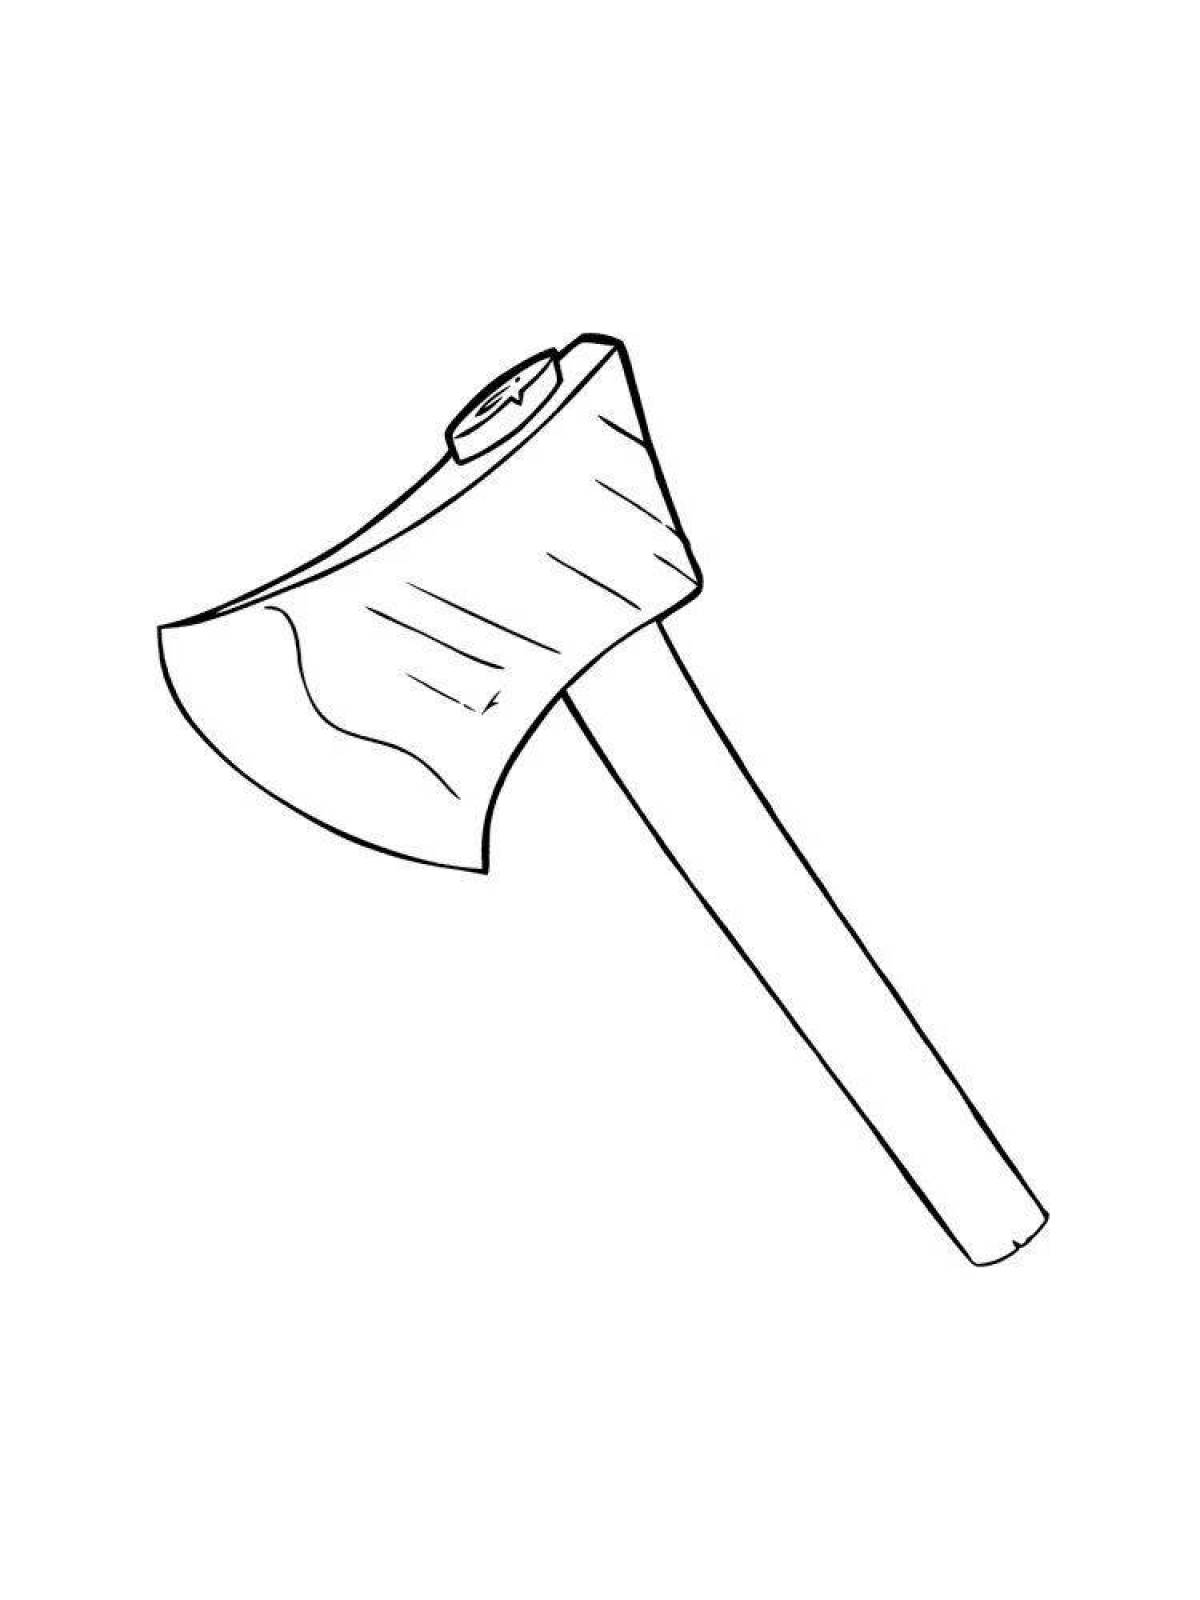 Outstanding ax coloring page for kids